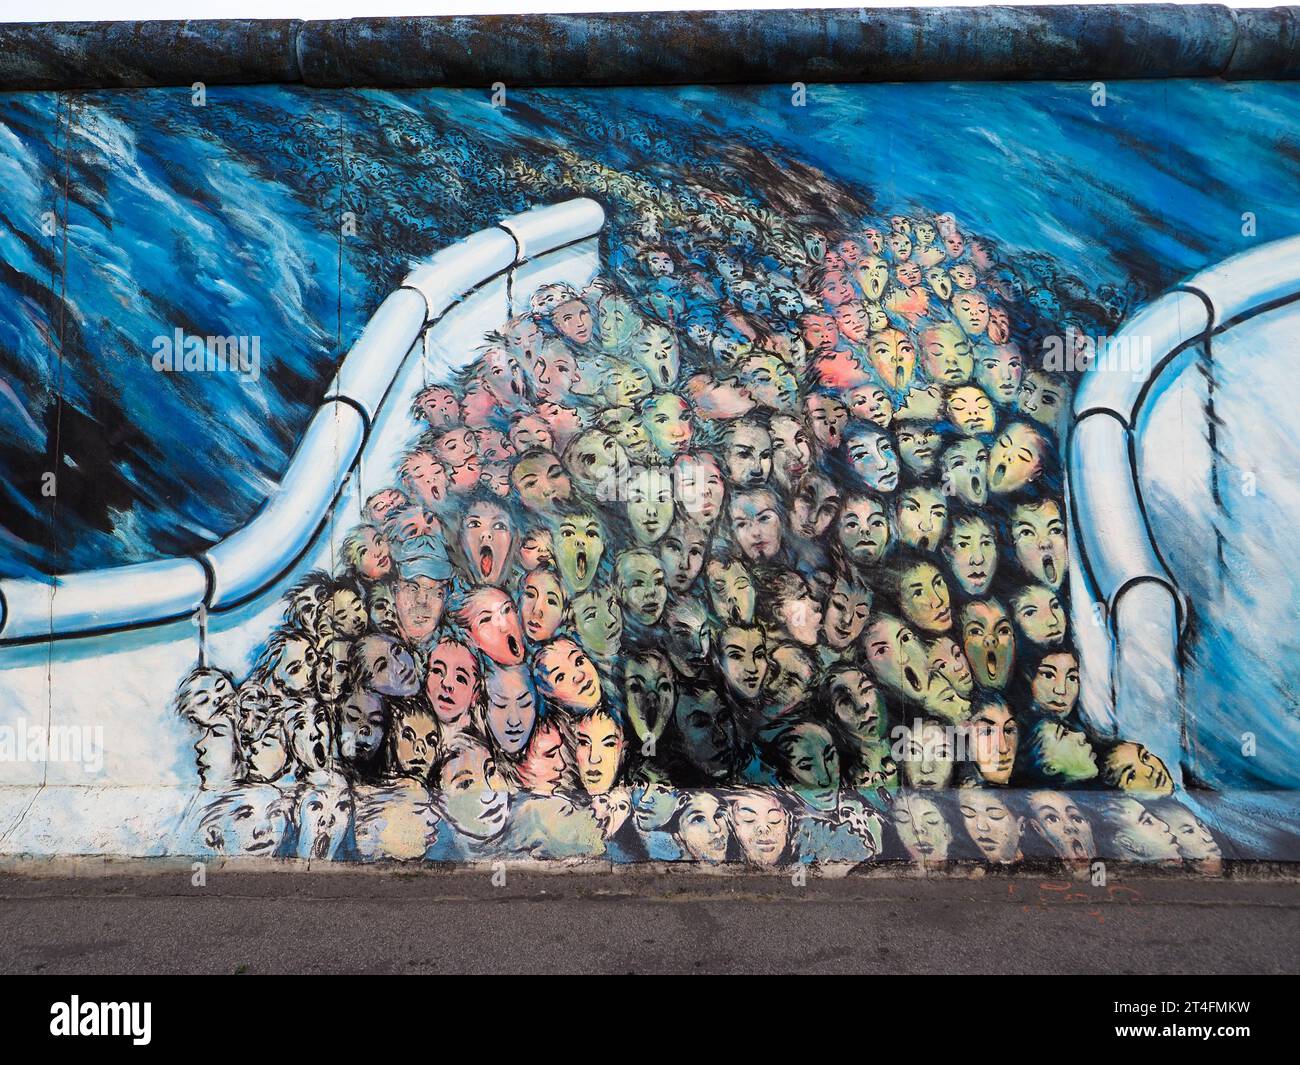 breaking Side Germany, Alamy on Wall, Berlin East Berlin through Berlin, Crowd Stock Photo the Gallery, - painting Europe Wall, the